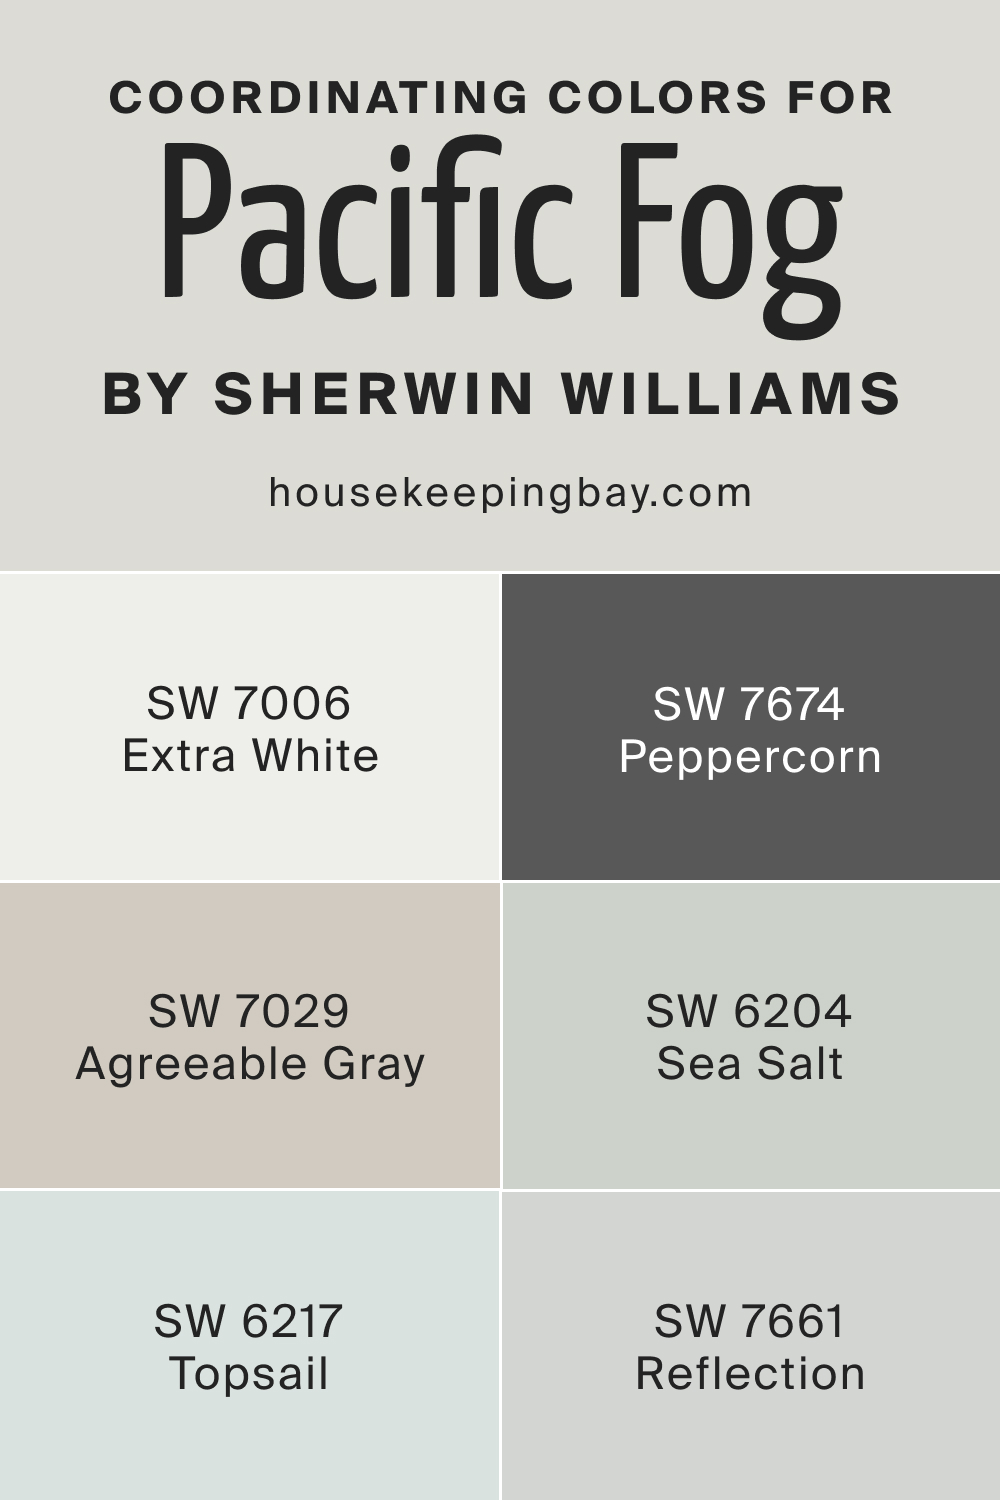 Coordinating Colors for SW 9627 Pacific Fog by Sherwin Williams